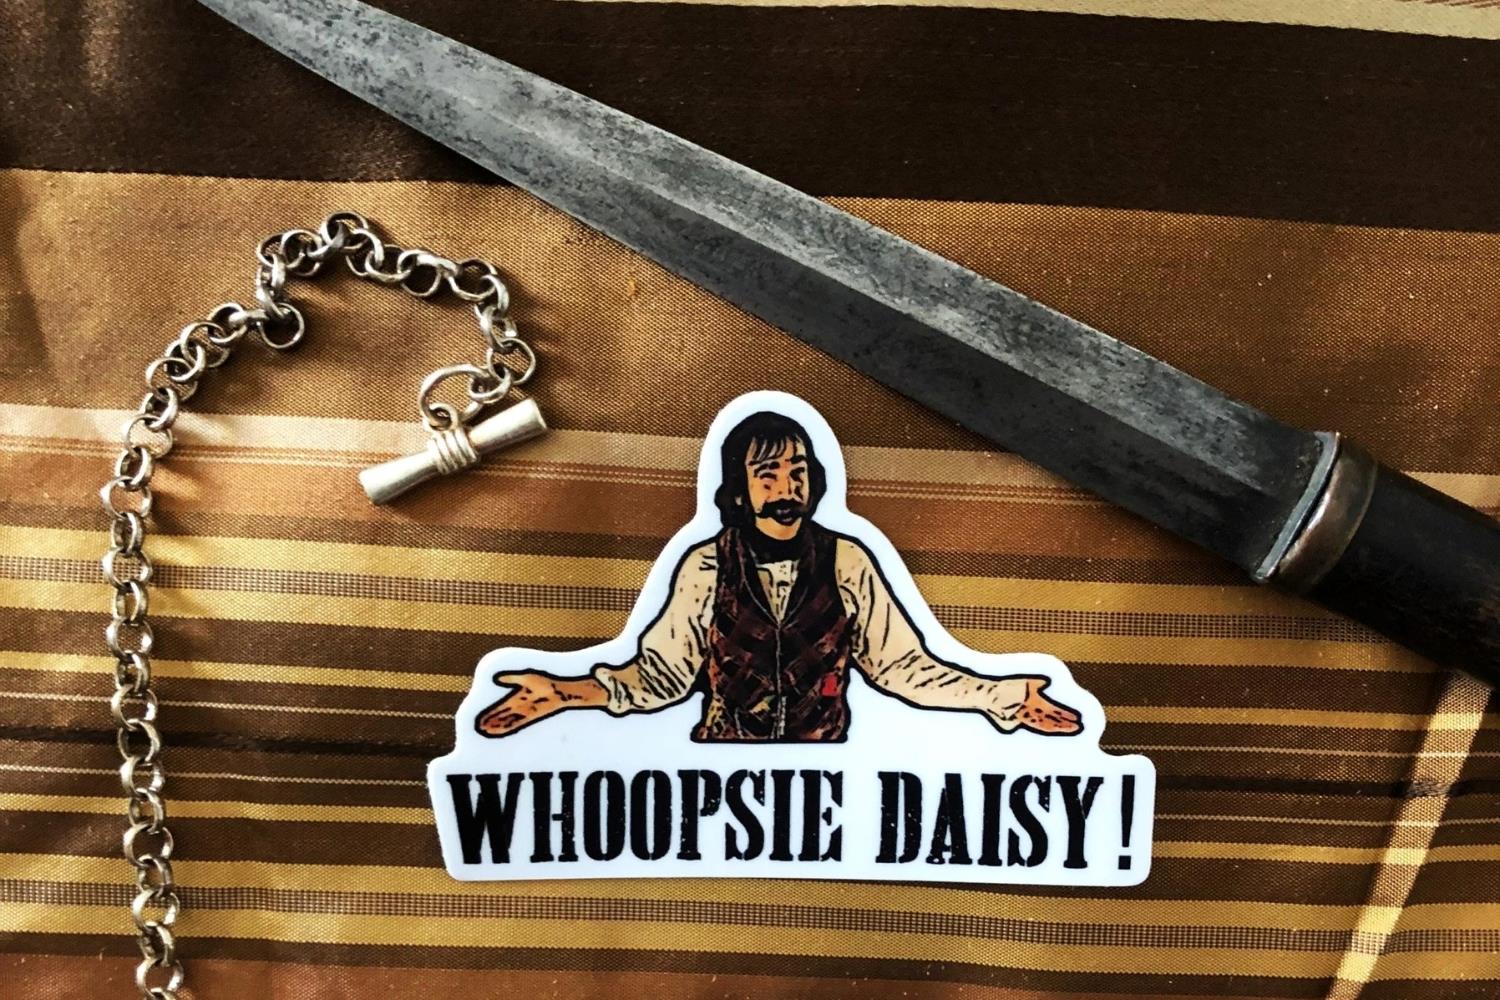 The Surprising Origins Of 'Whoopsie Daisy' Revealed!